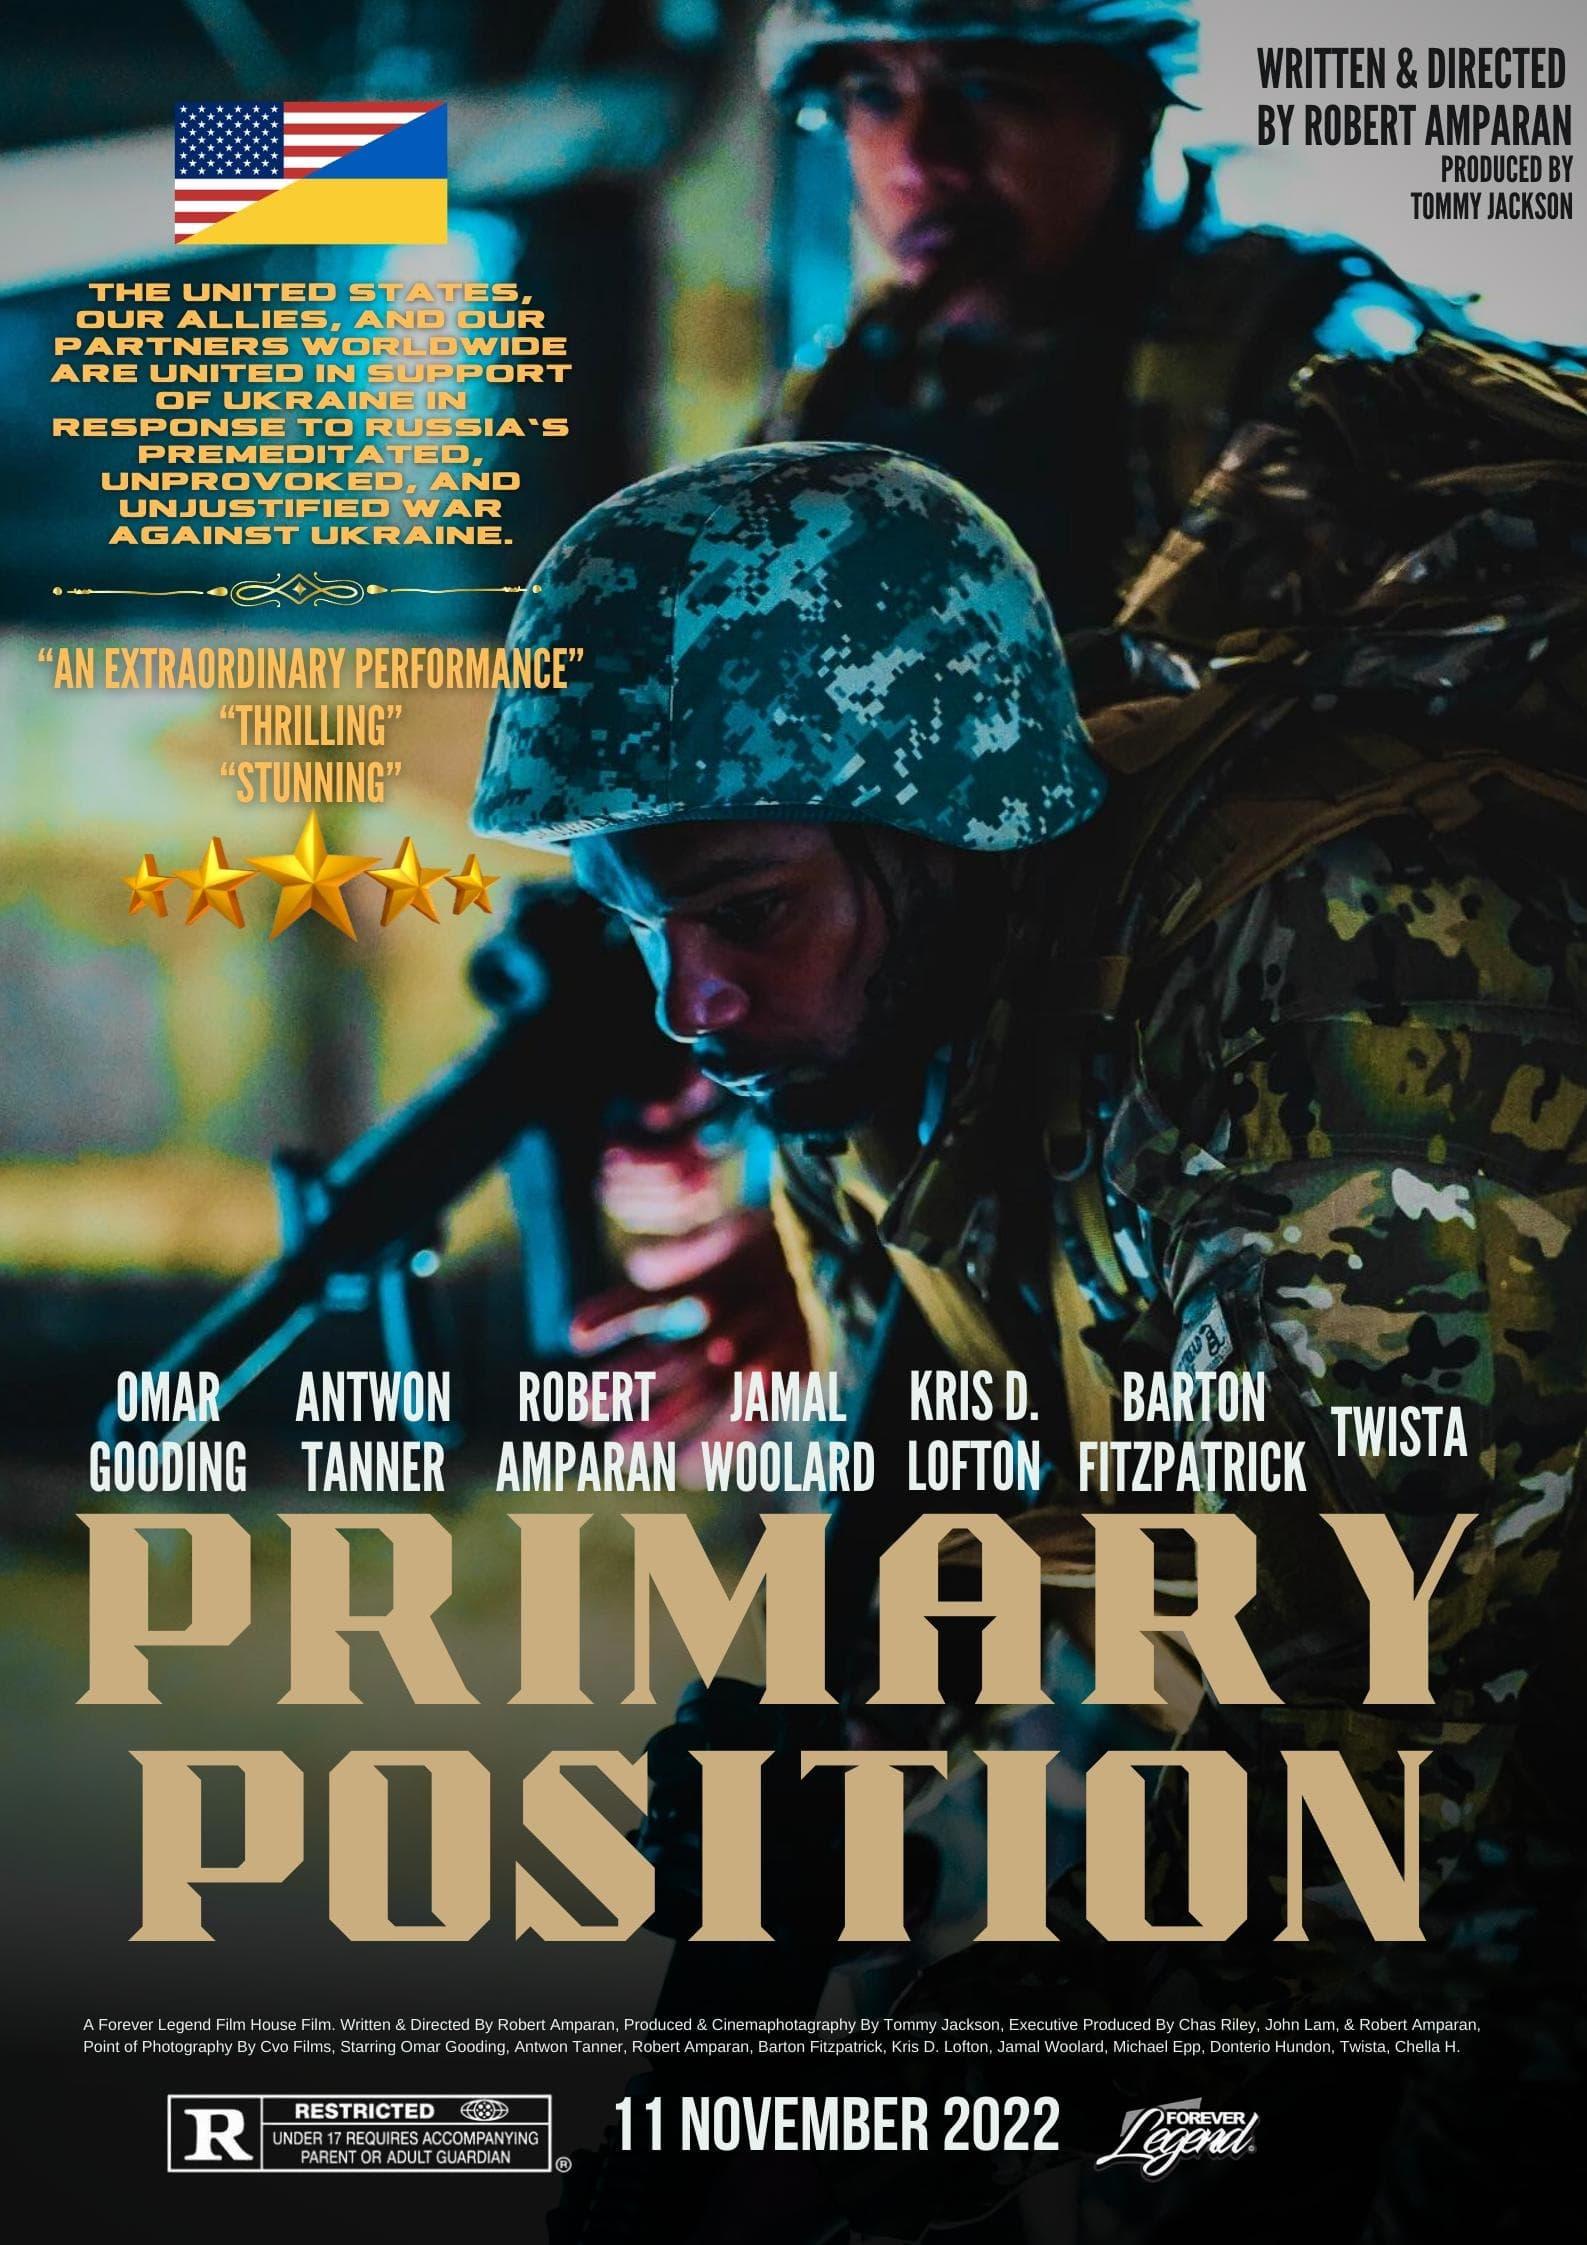 Primary Position poster